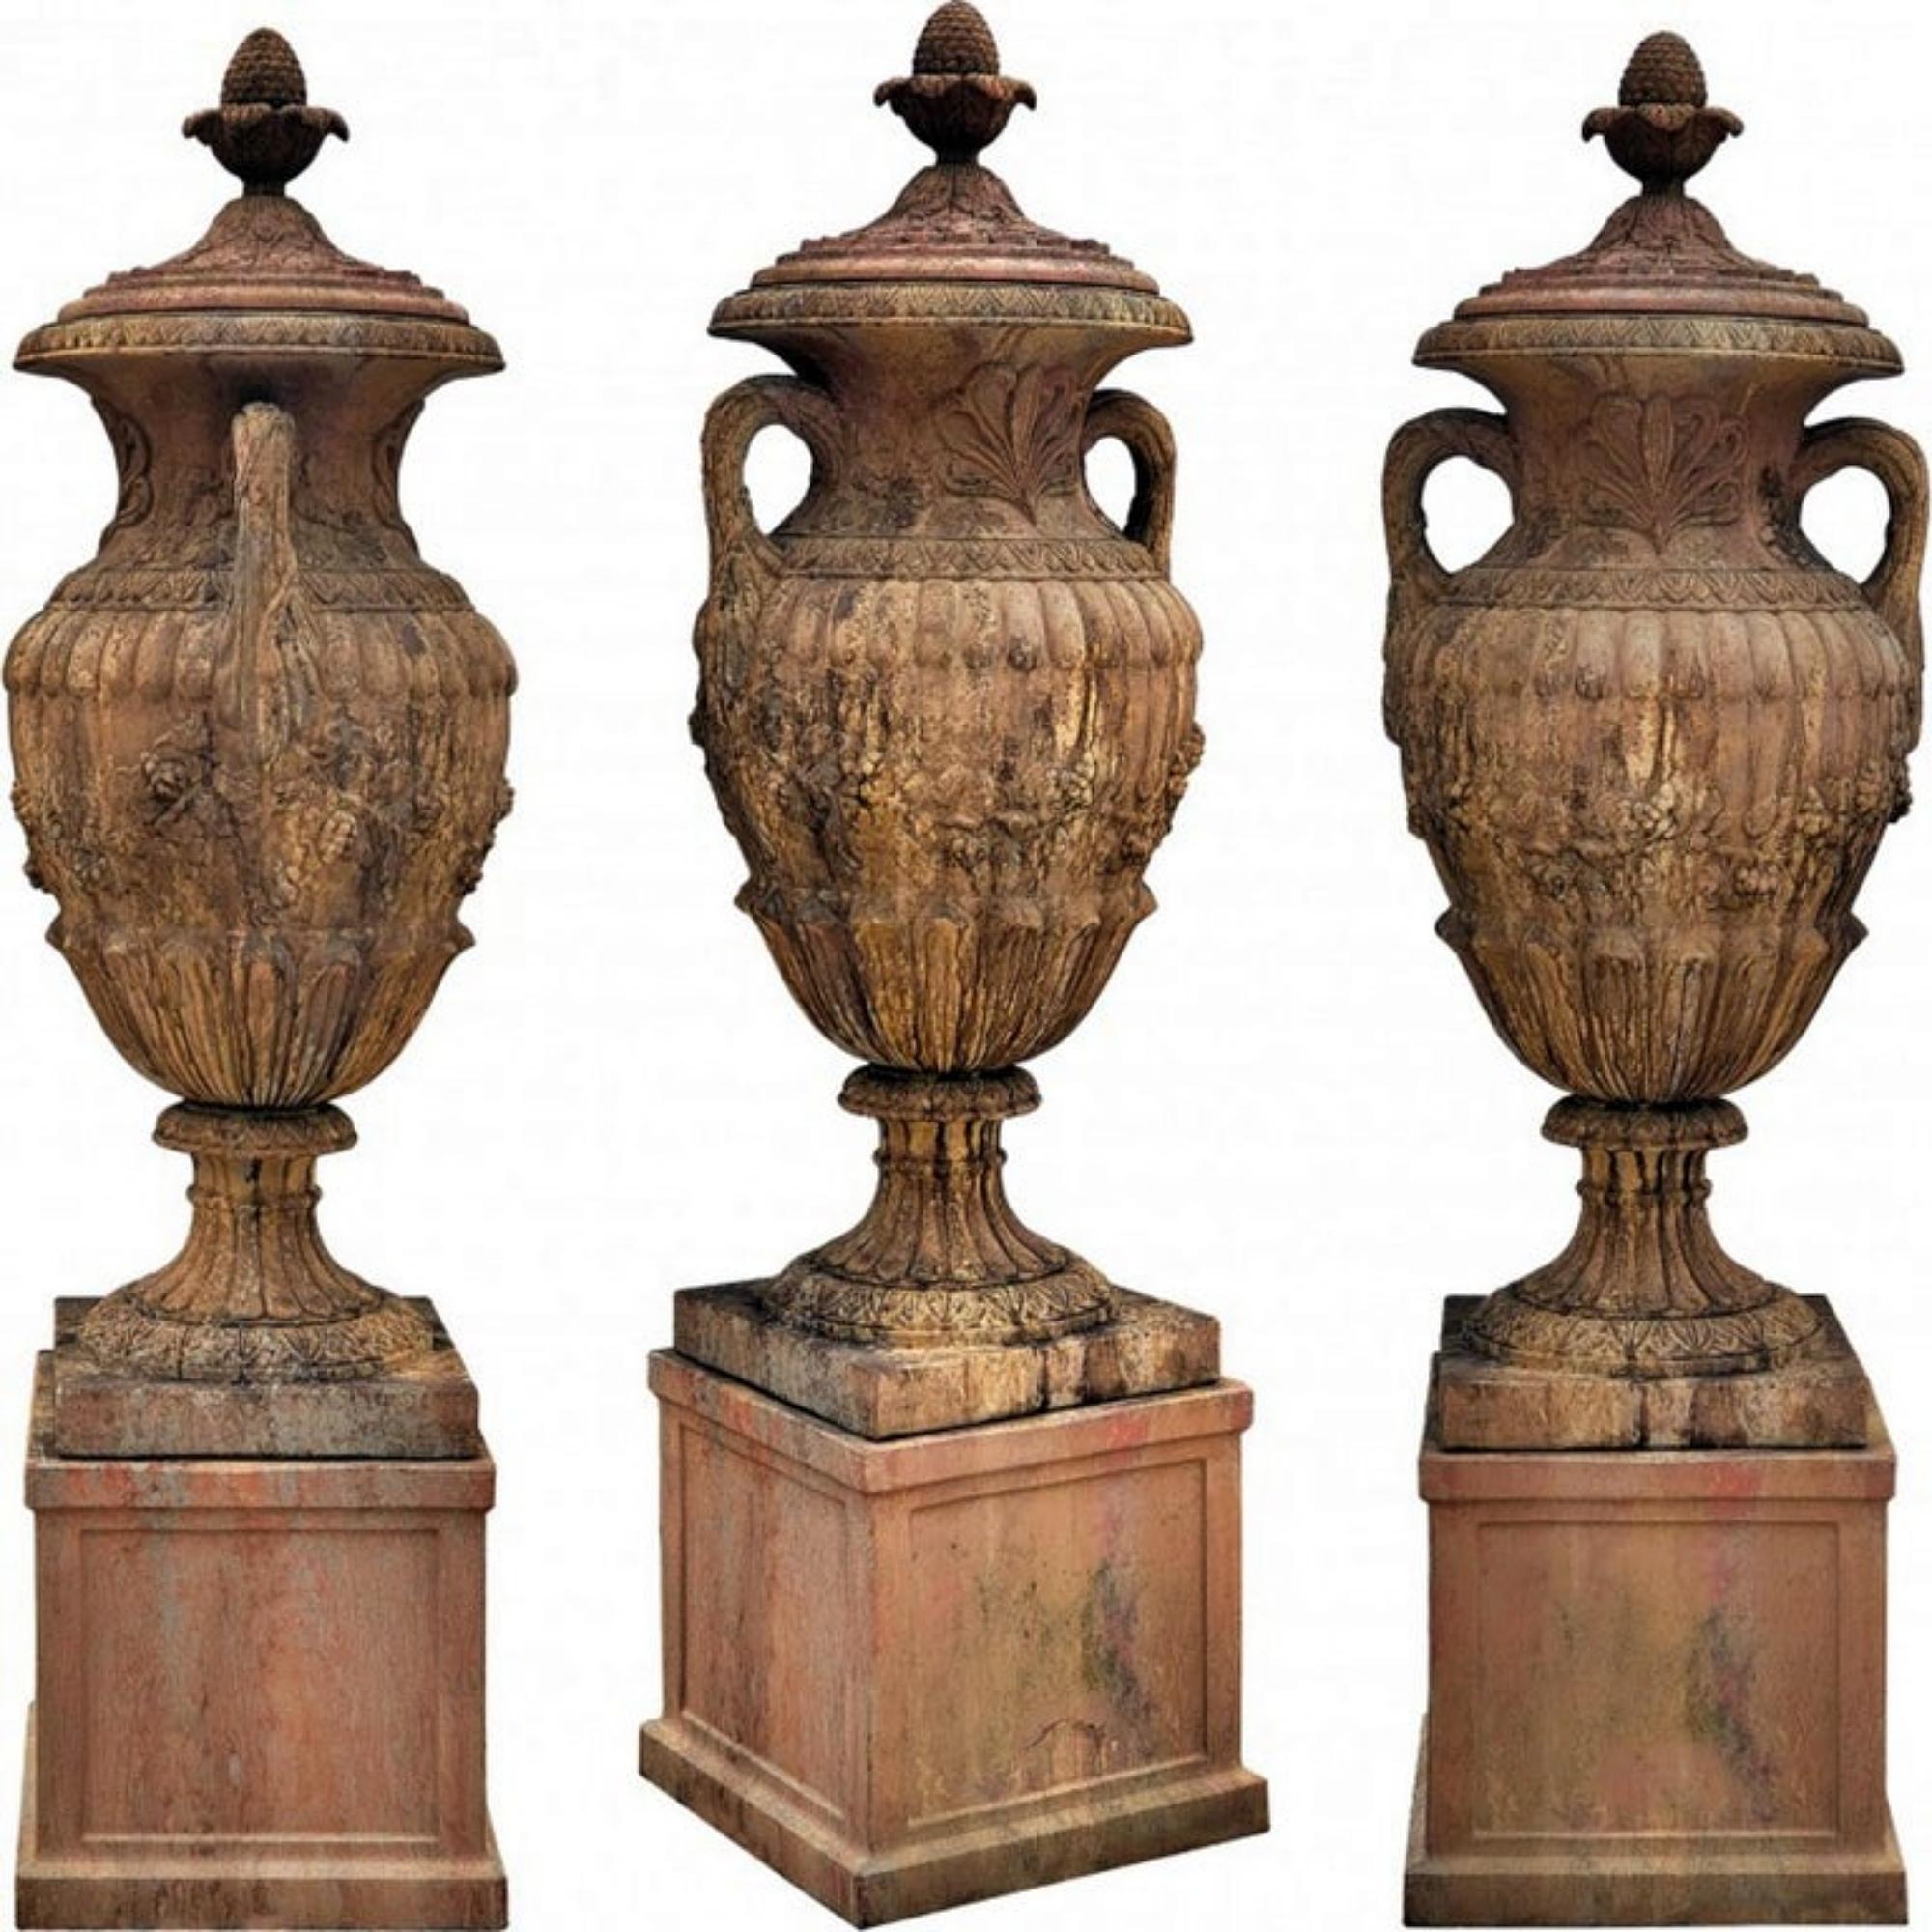 Large ornamental terracotta vase with base early 20th Century
Italy

Vase of current production, the realization was freely inspired by an eighteenth-century vase of Tuscan origin.
The 152 cm tall vase is made in three pieces, and the base is 54